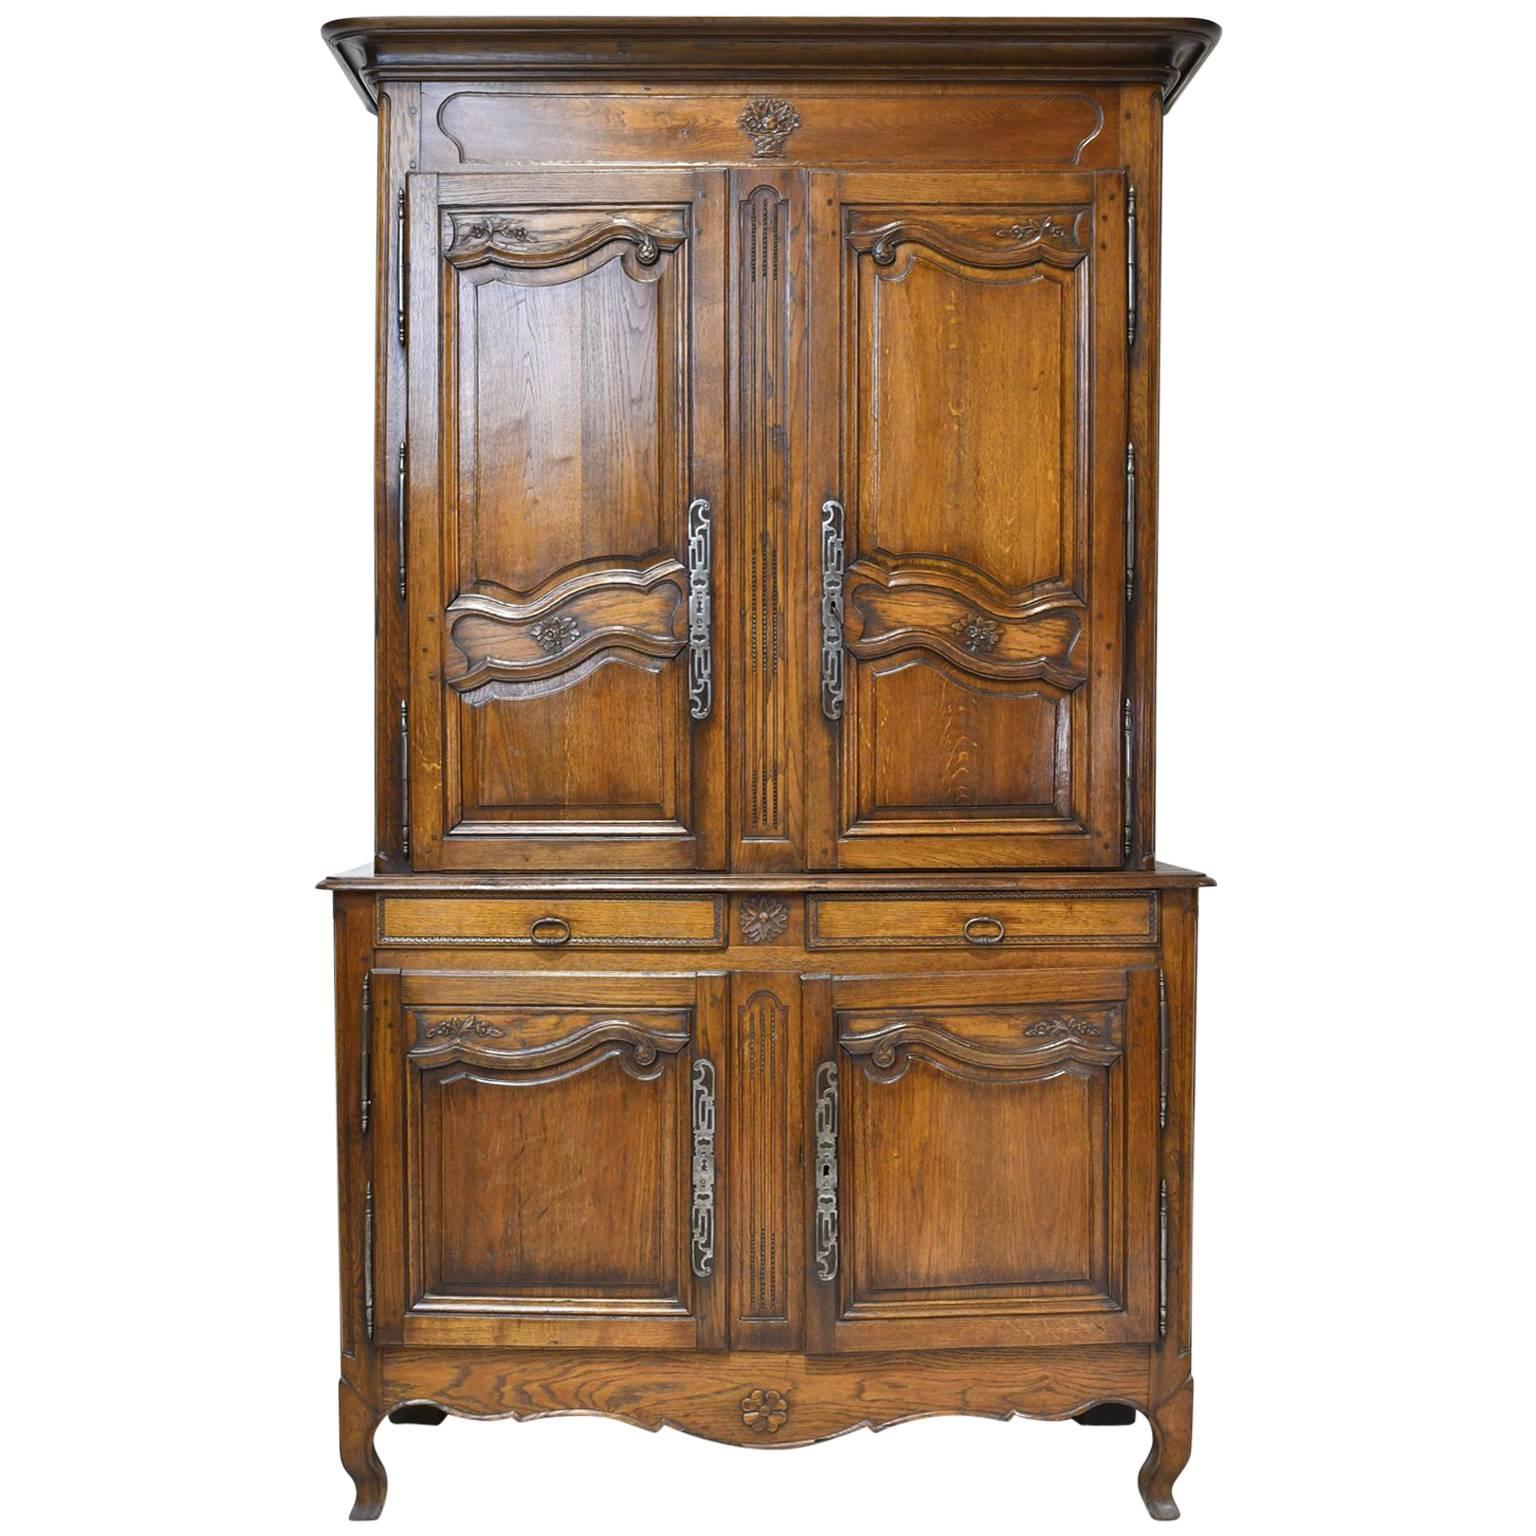 18th Century Tall French Buffet a Deux Corps in Oak with Hand-Carved Panels